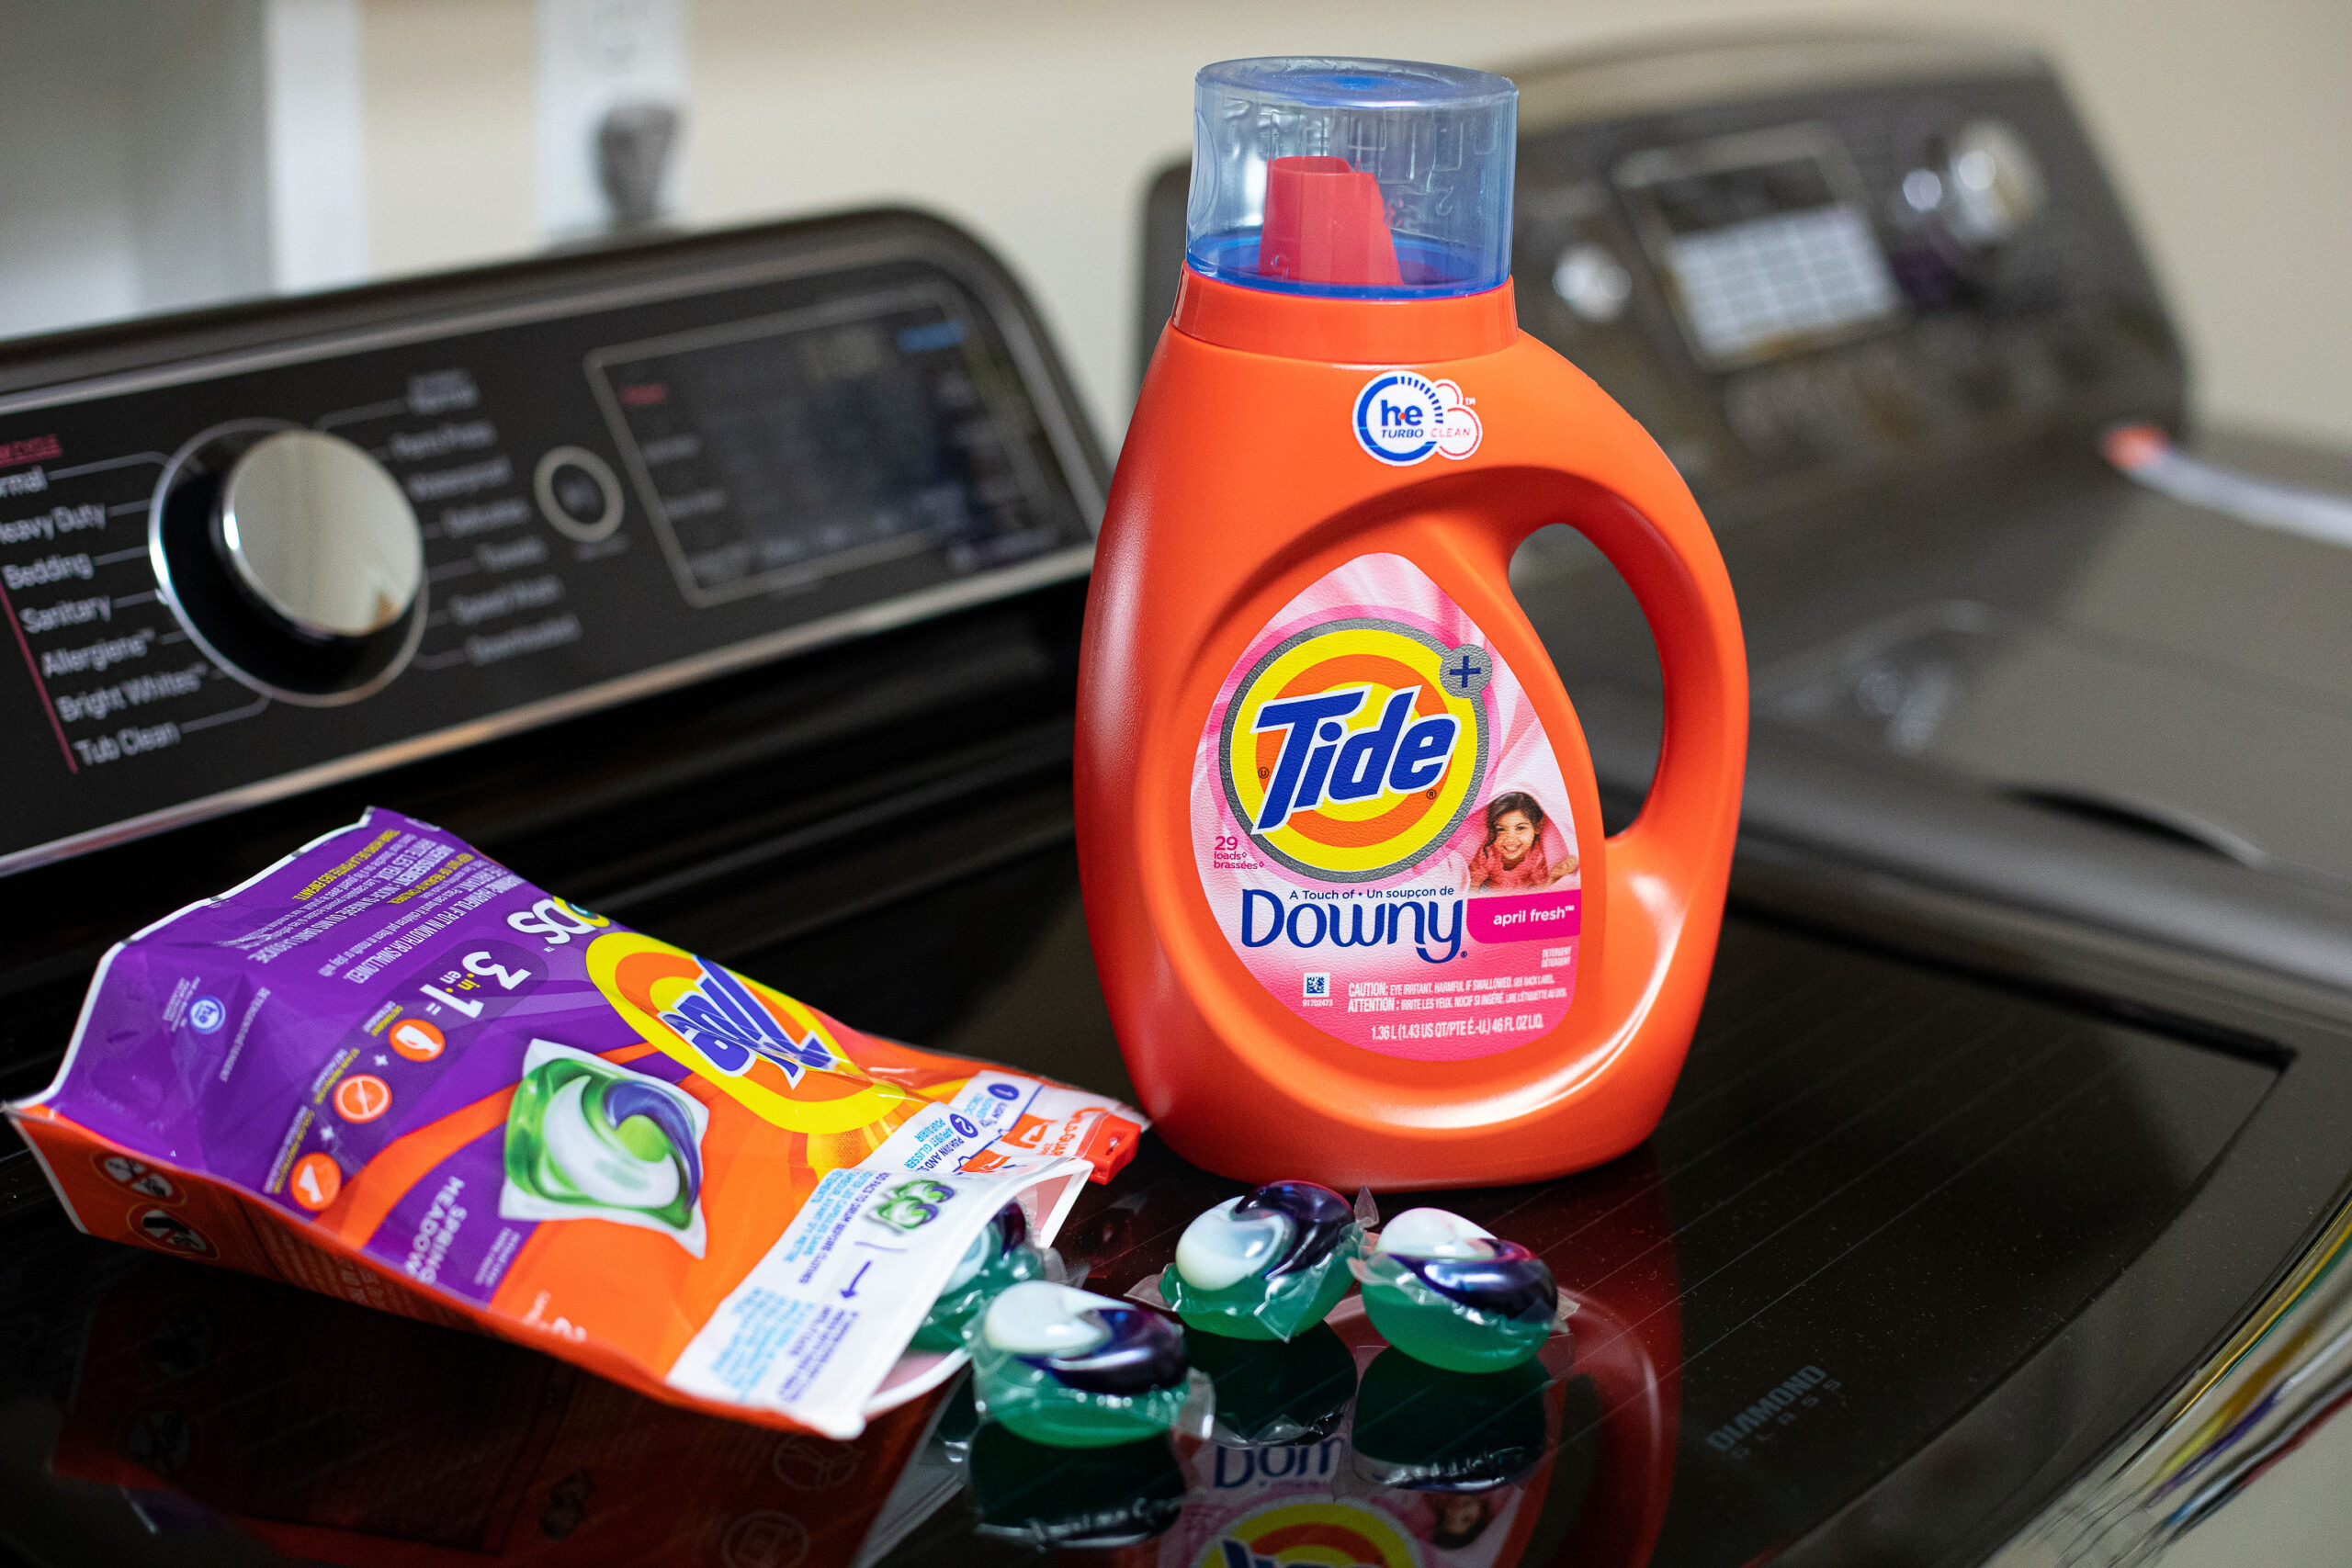 Get Tide Liquid For As Low As $3.99 At Kroger (Save $3!)